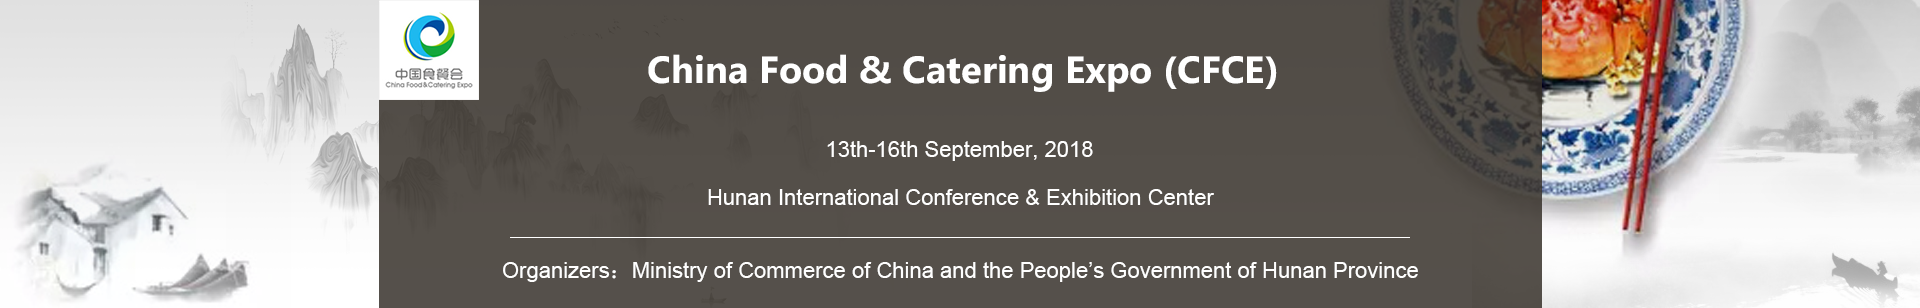 2018 China Food & Catering Expo